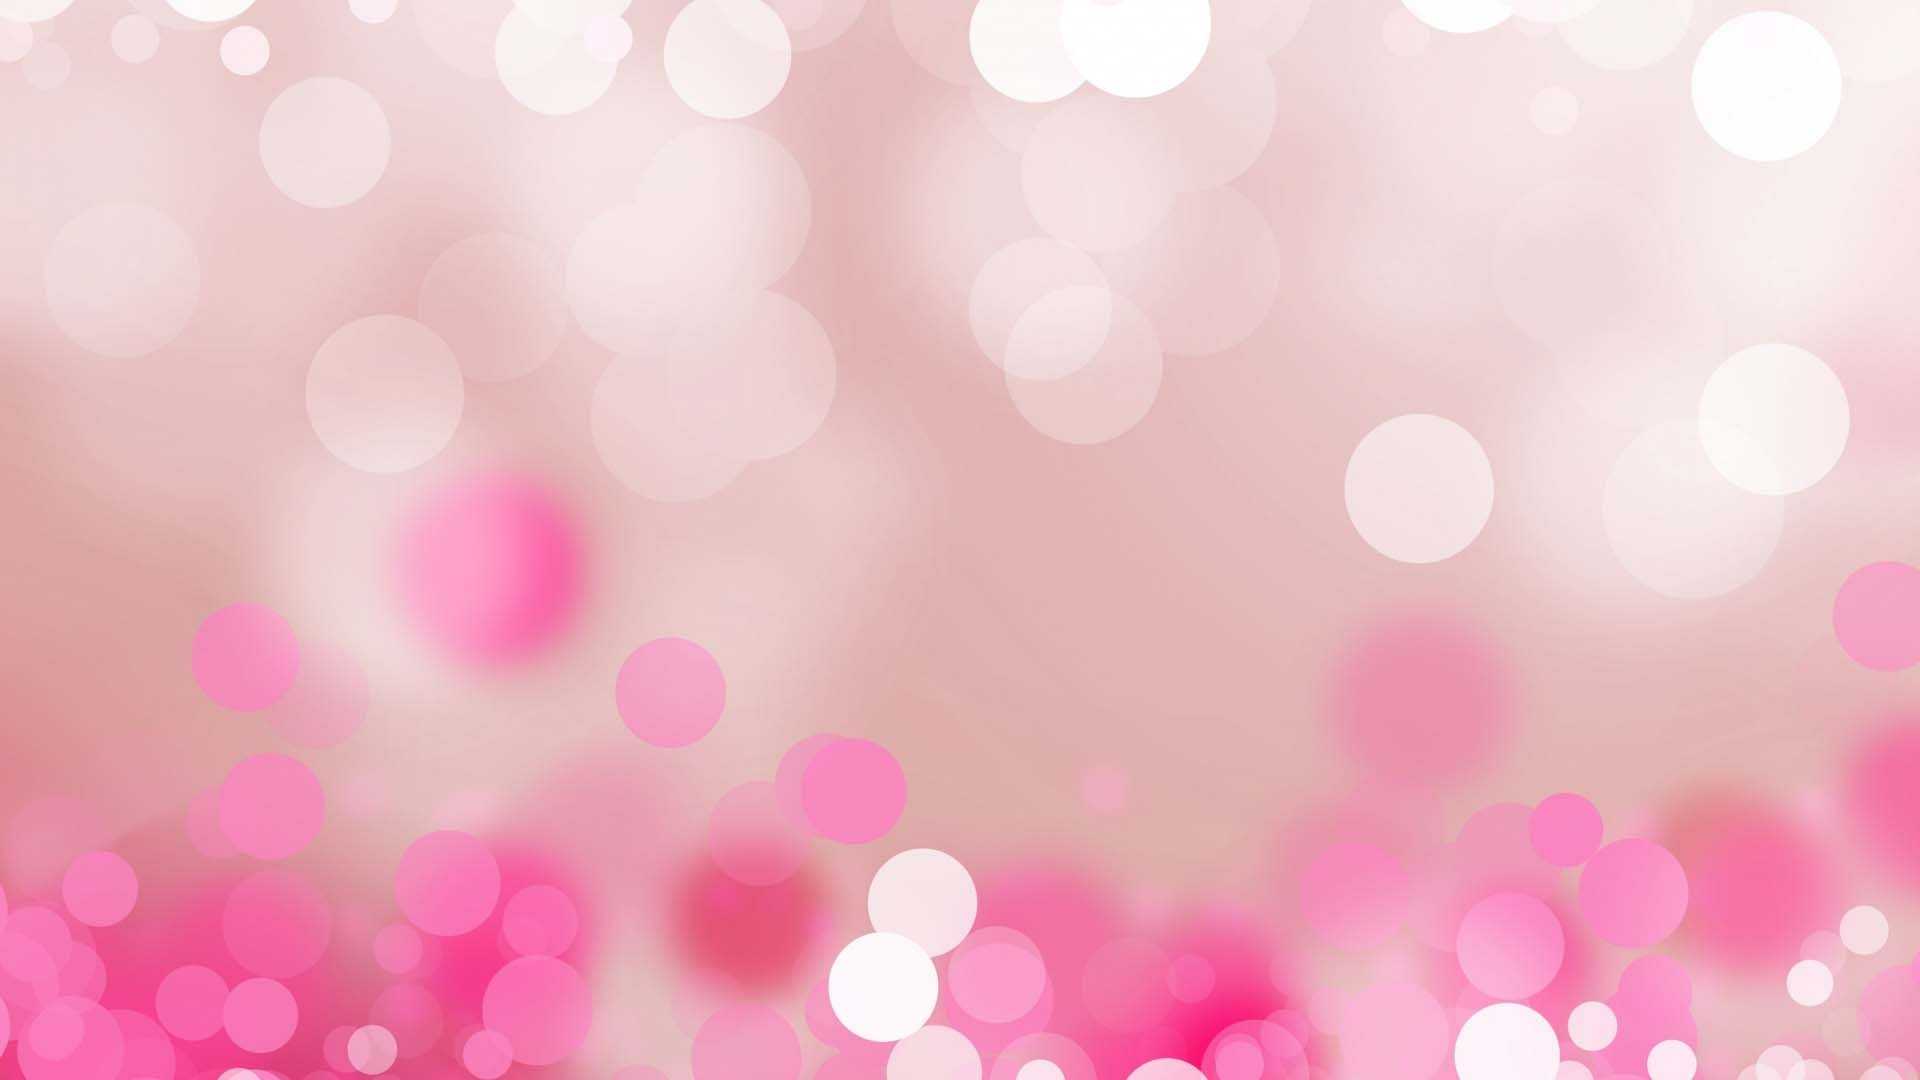 A pink background with white dots - Pastel pink, cute pink, hot pink, soft pink, light pink, glitter